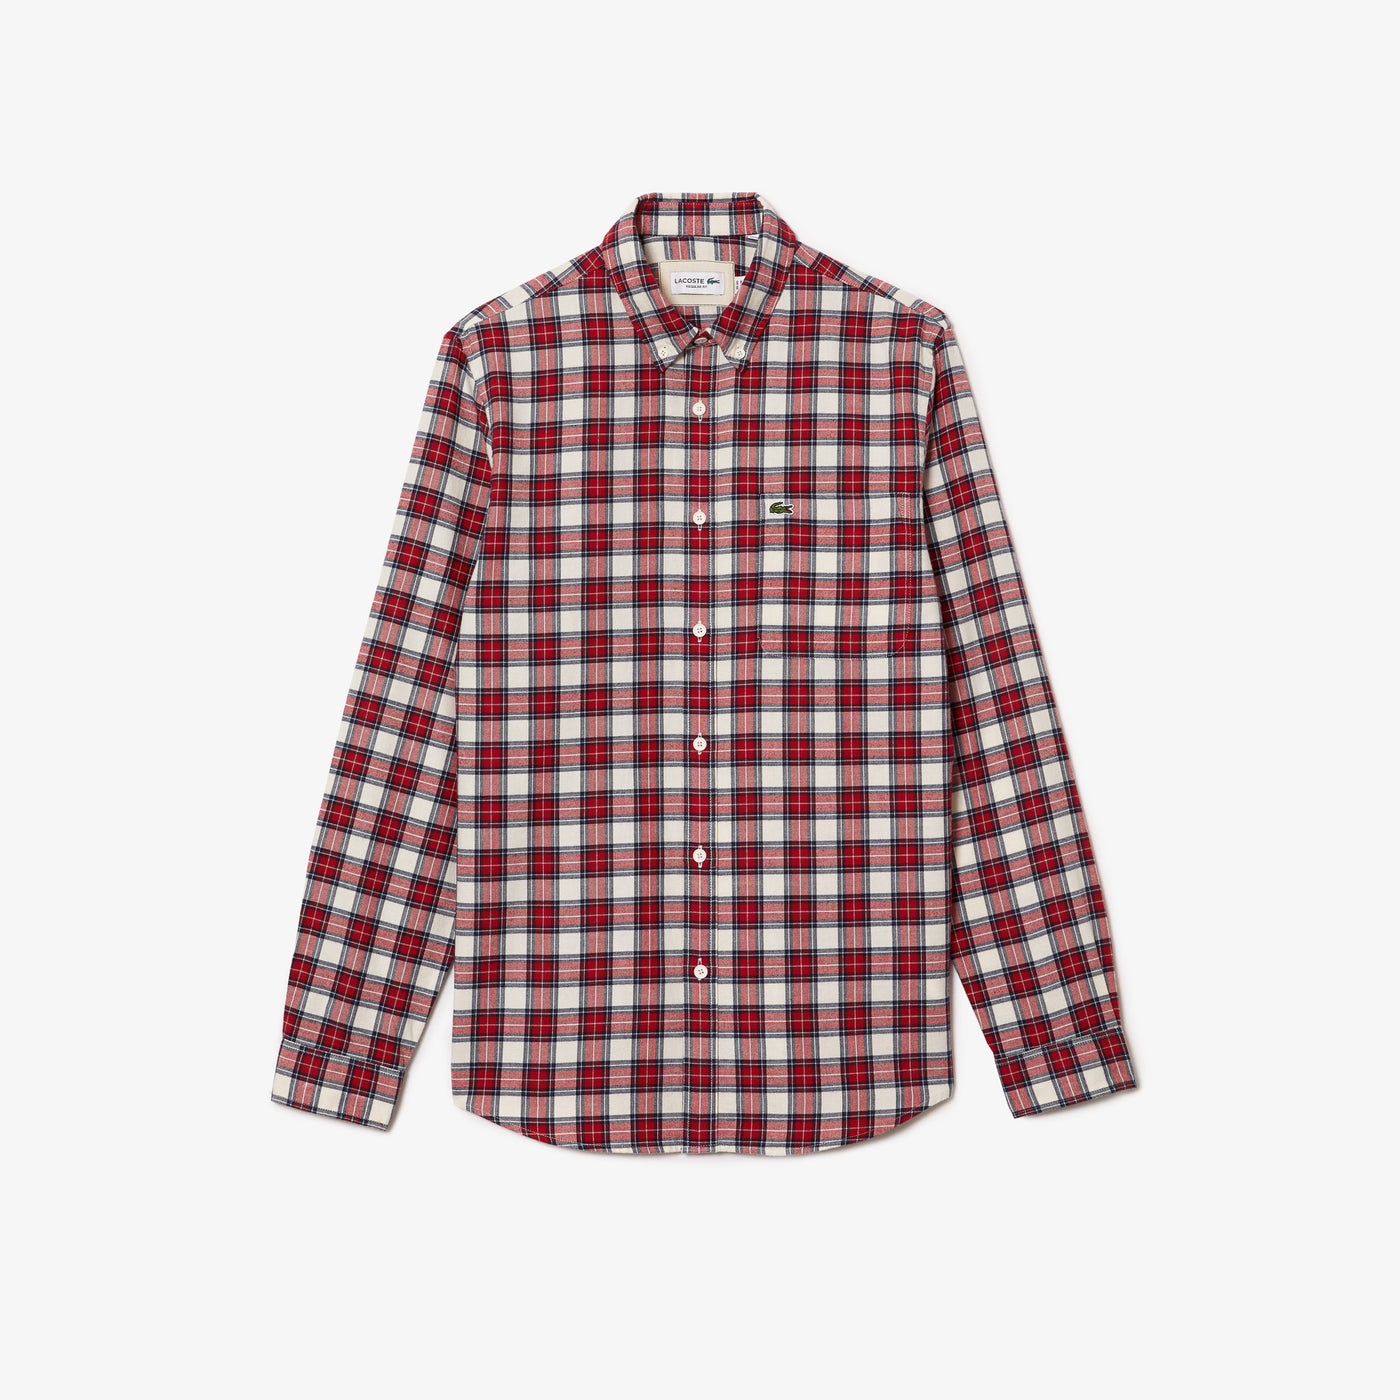 Shop The Latest Collection Of Outlet - Lacoste Men'S Lacoste Regular Fit Check Print Shirt - Ch0208 In Lebanon